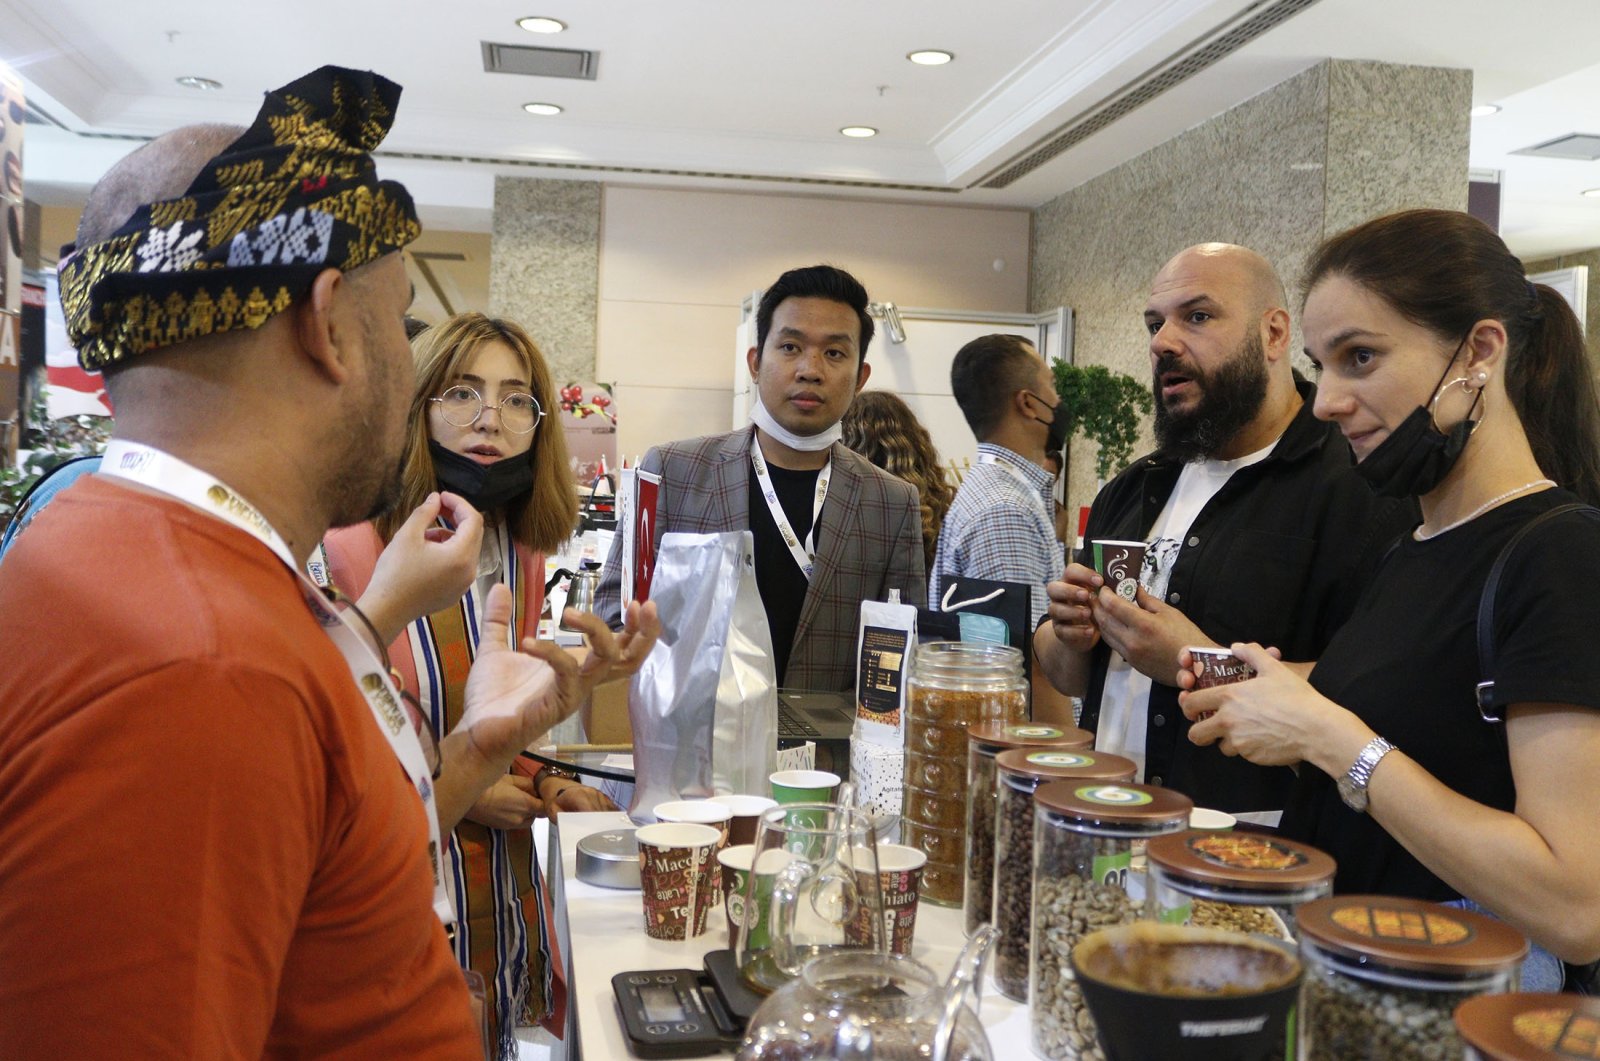 People visit Coffex Istanbul, an expo devoted entirely to coffee. (Photo courtesy of Leyla Yvonne Ergil)